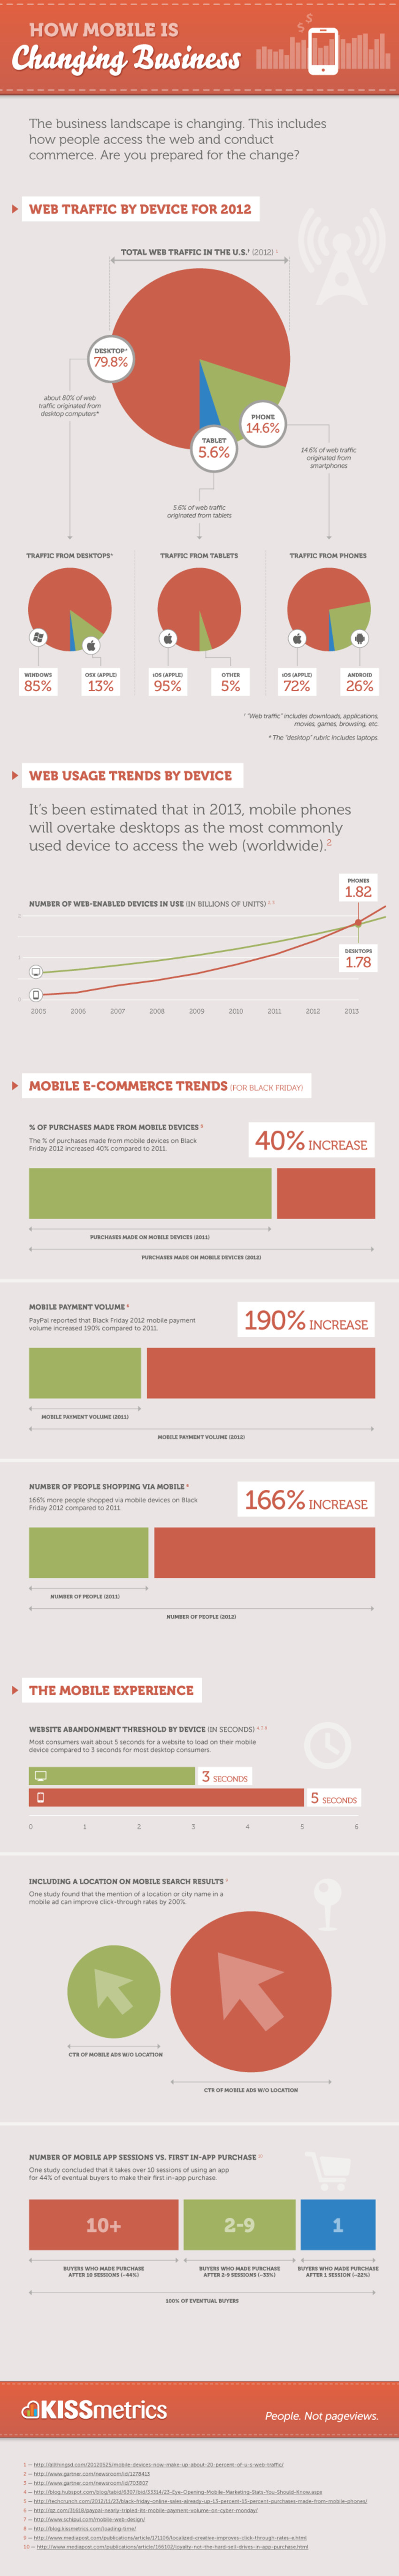 How Mobile is Changing Business - Infographic - KISSmetrics | The MarTech Digest | Scoop.it